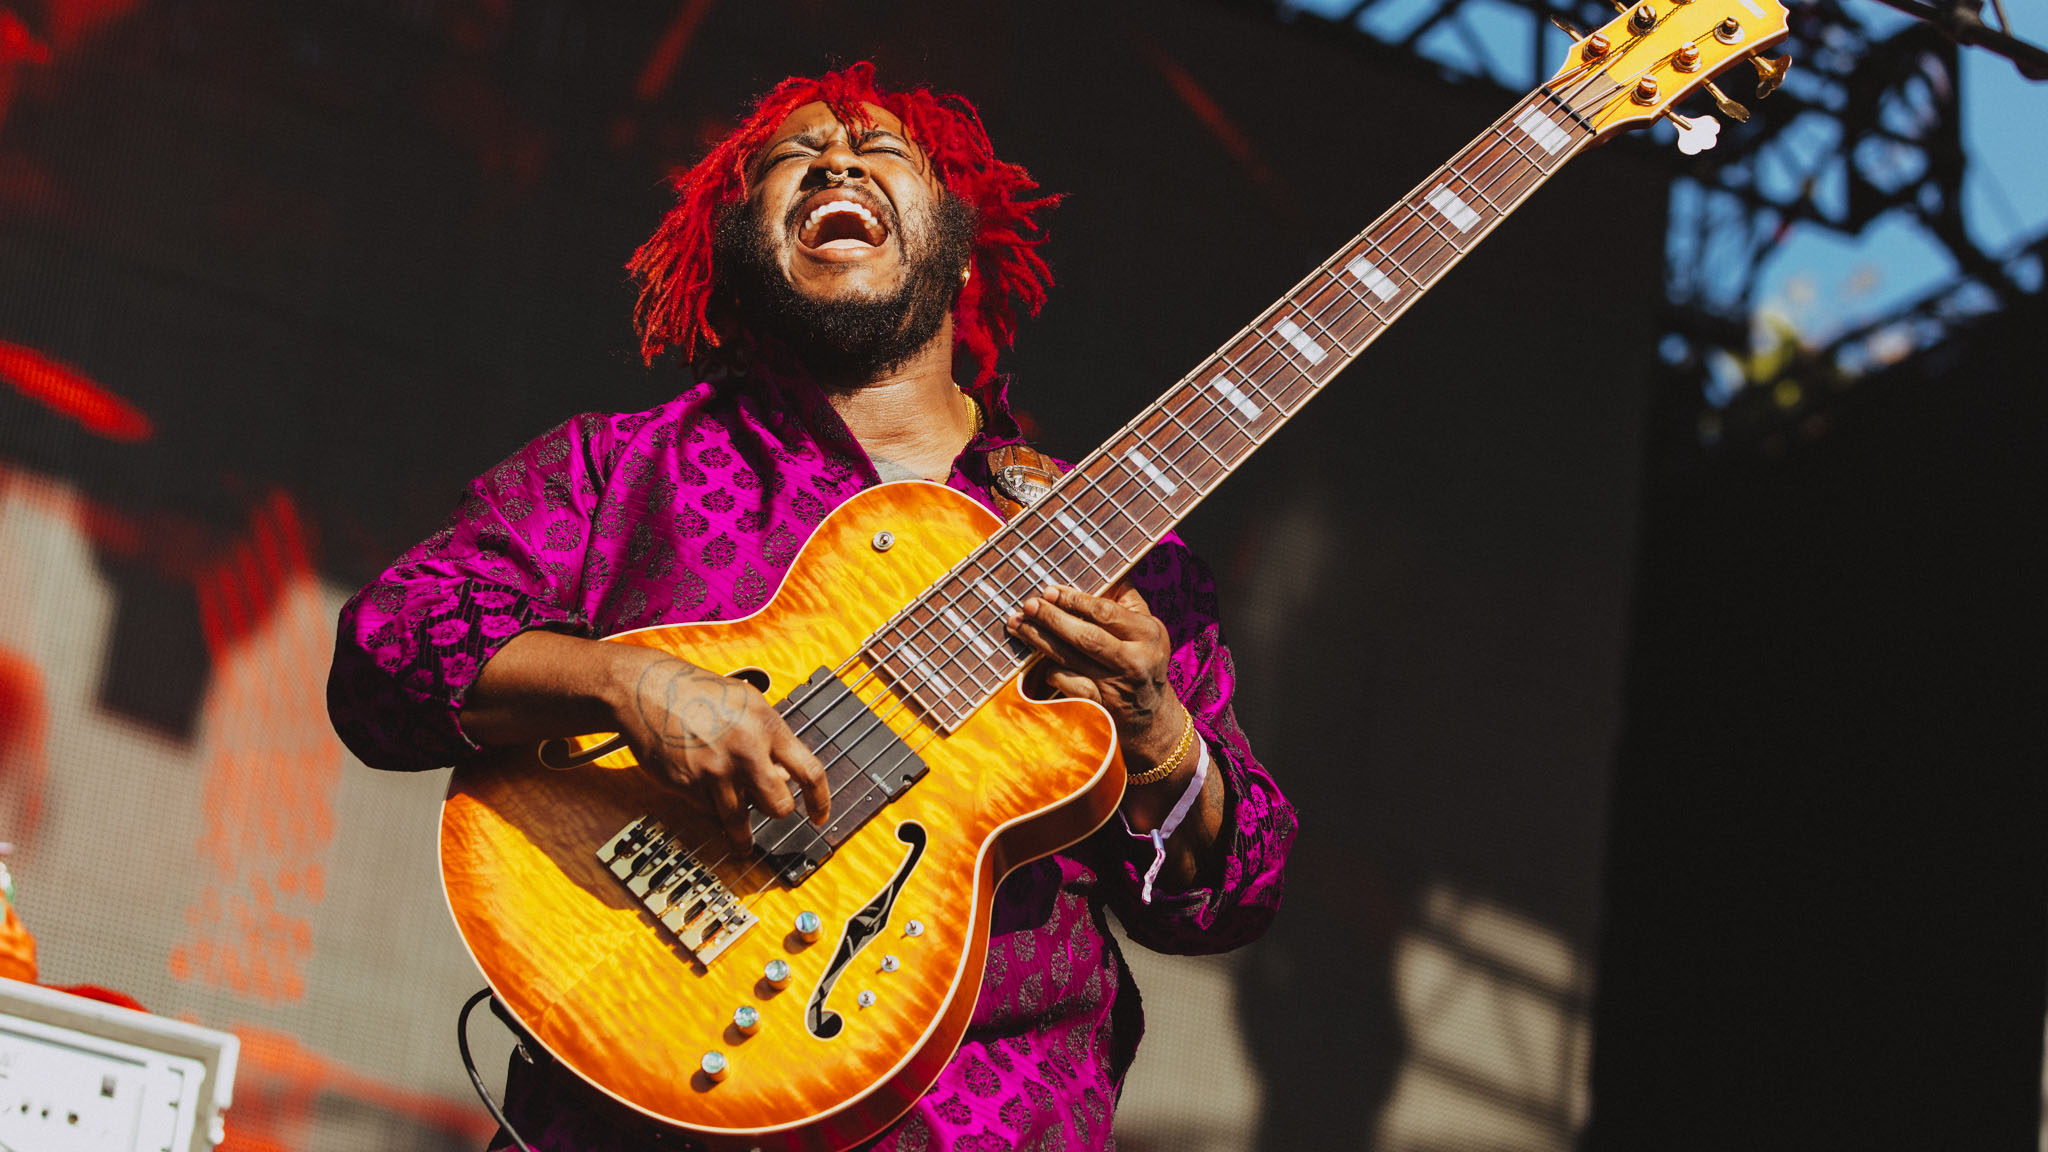 www.thewickedsound.com Thundercat it is what it is